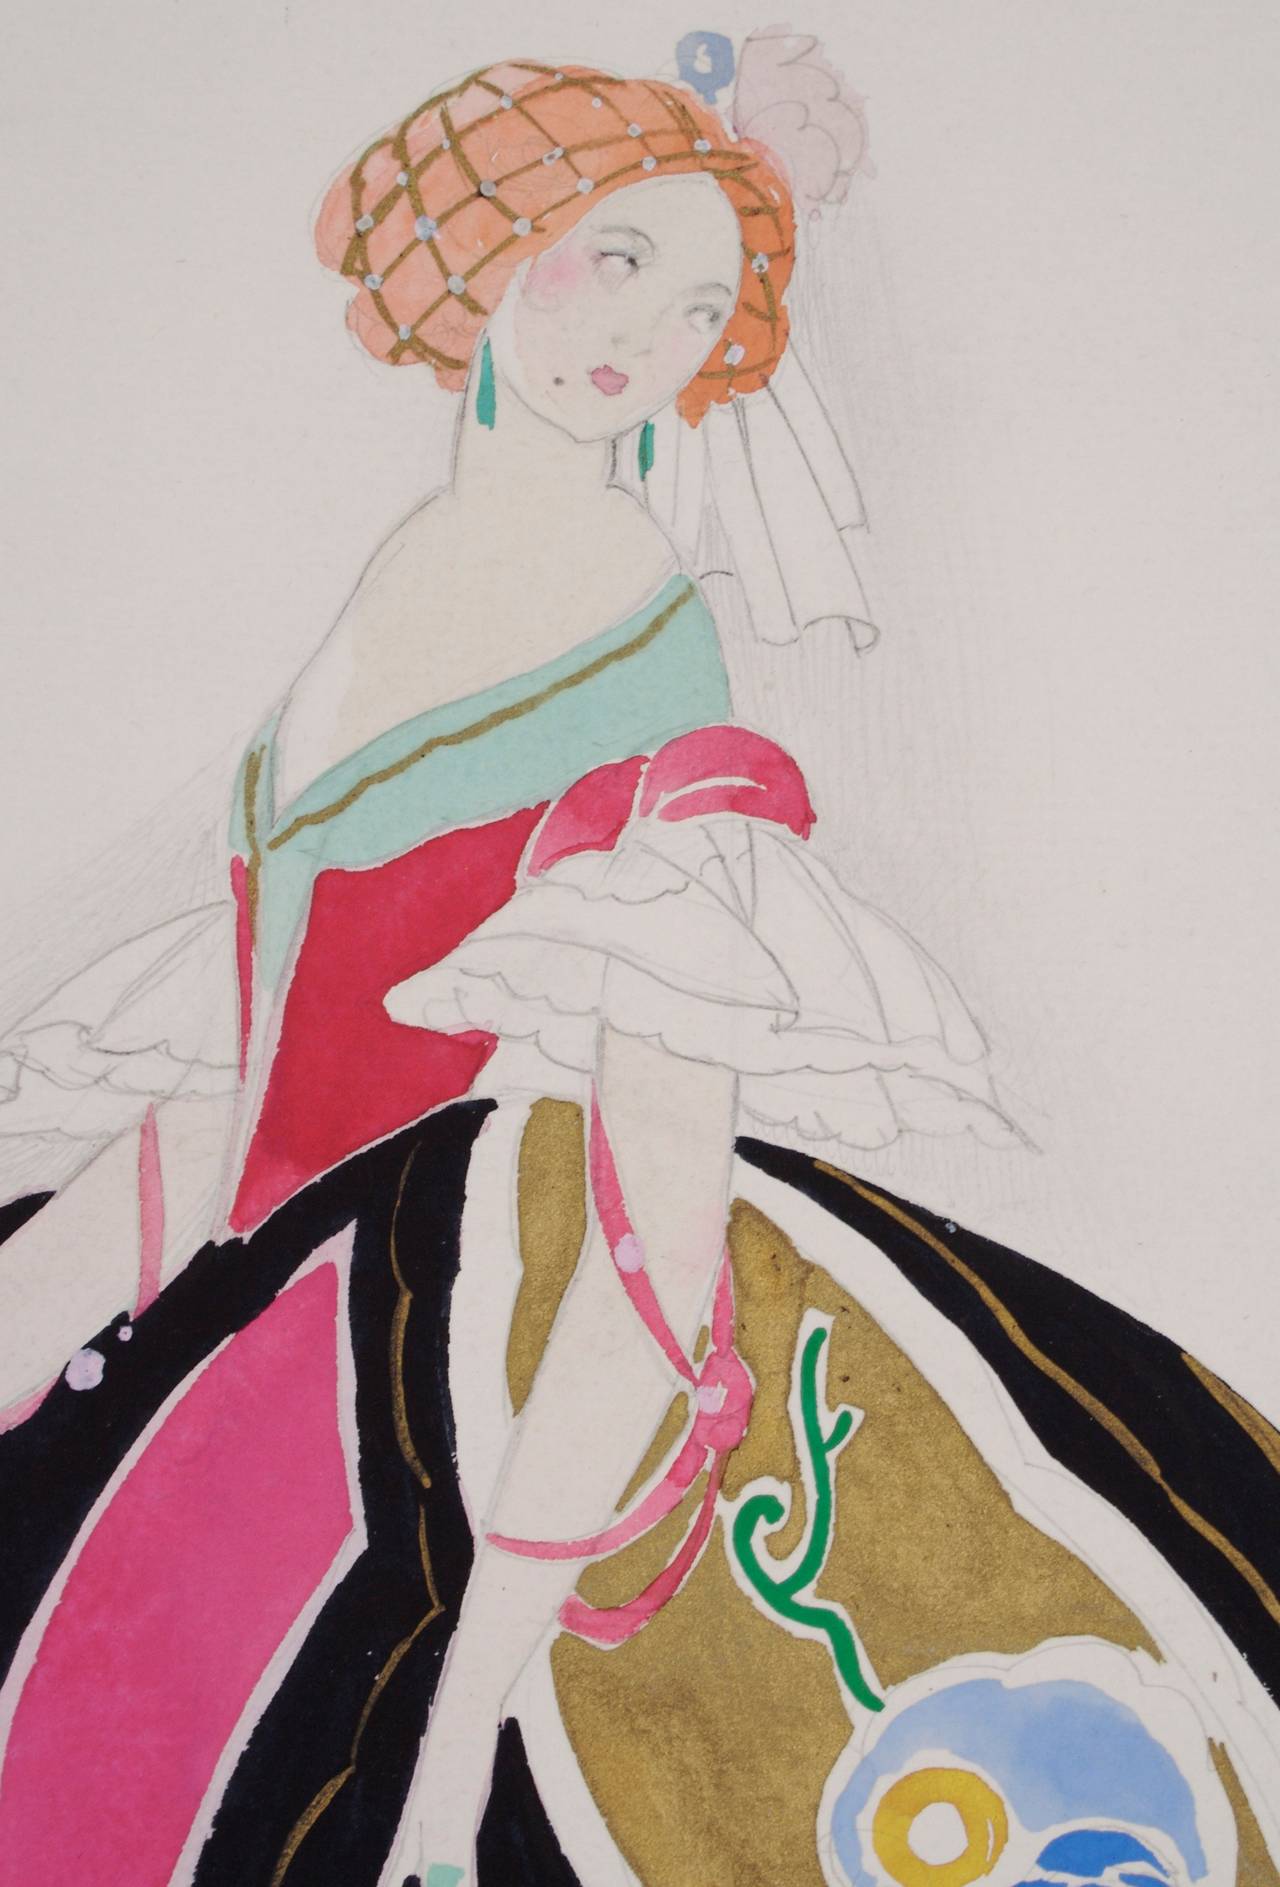 An Art Deco period watercolor and pencil on paper costume design by Umberto Brunelleschi, circa 1920s. Signed in pencil, lower right.

Italian born Brunelleschi (1879-1949) was a painter, printmaker, illustrator and designer. He permanently